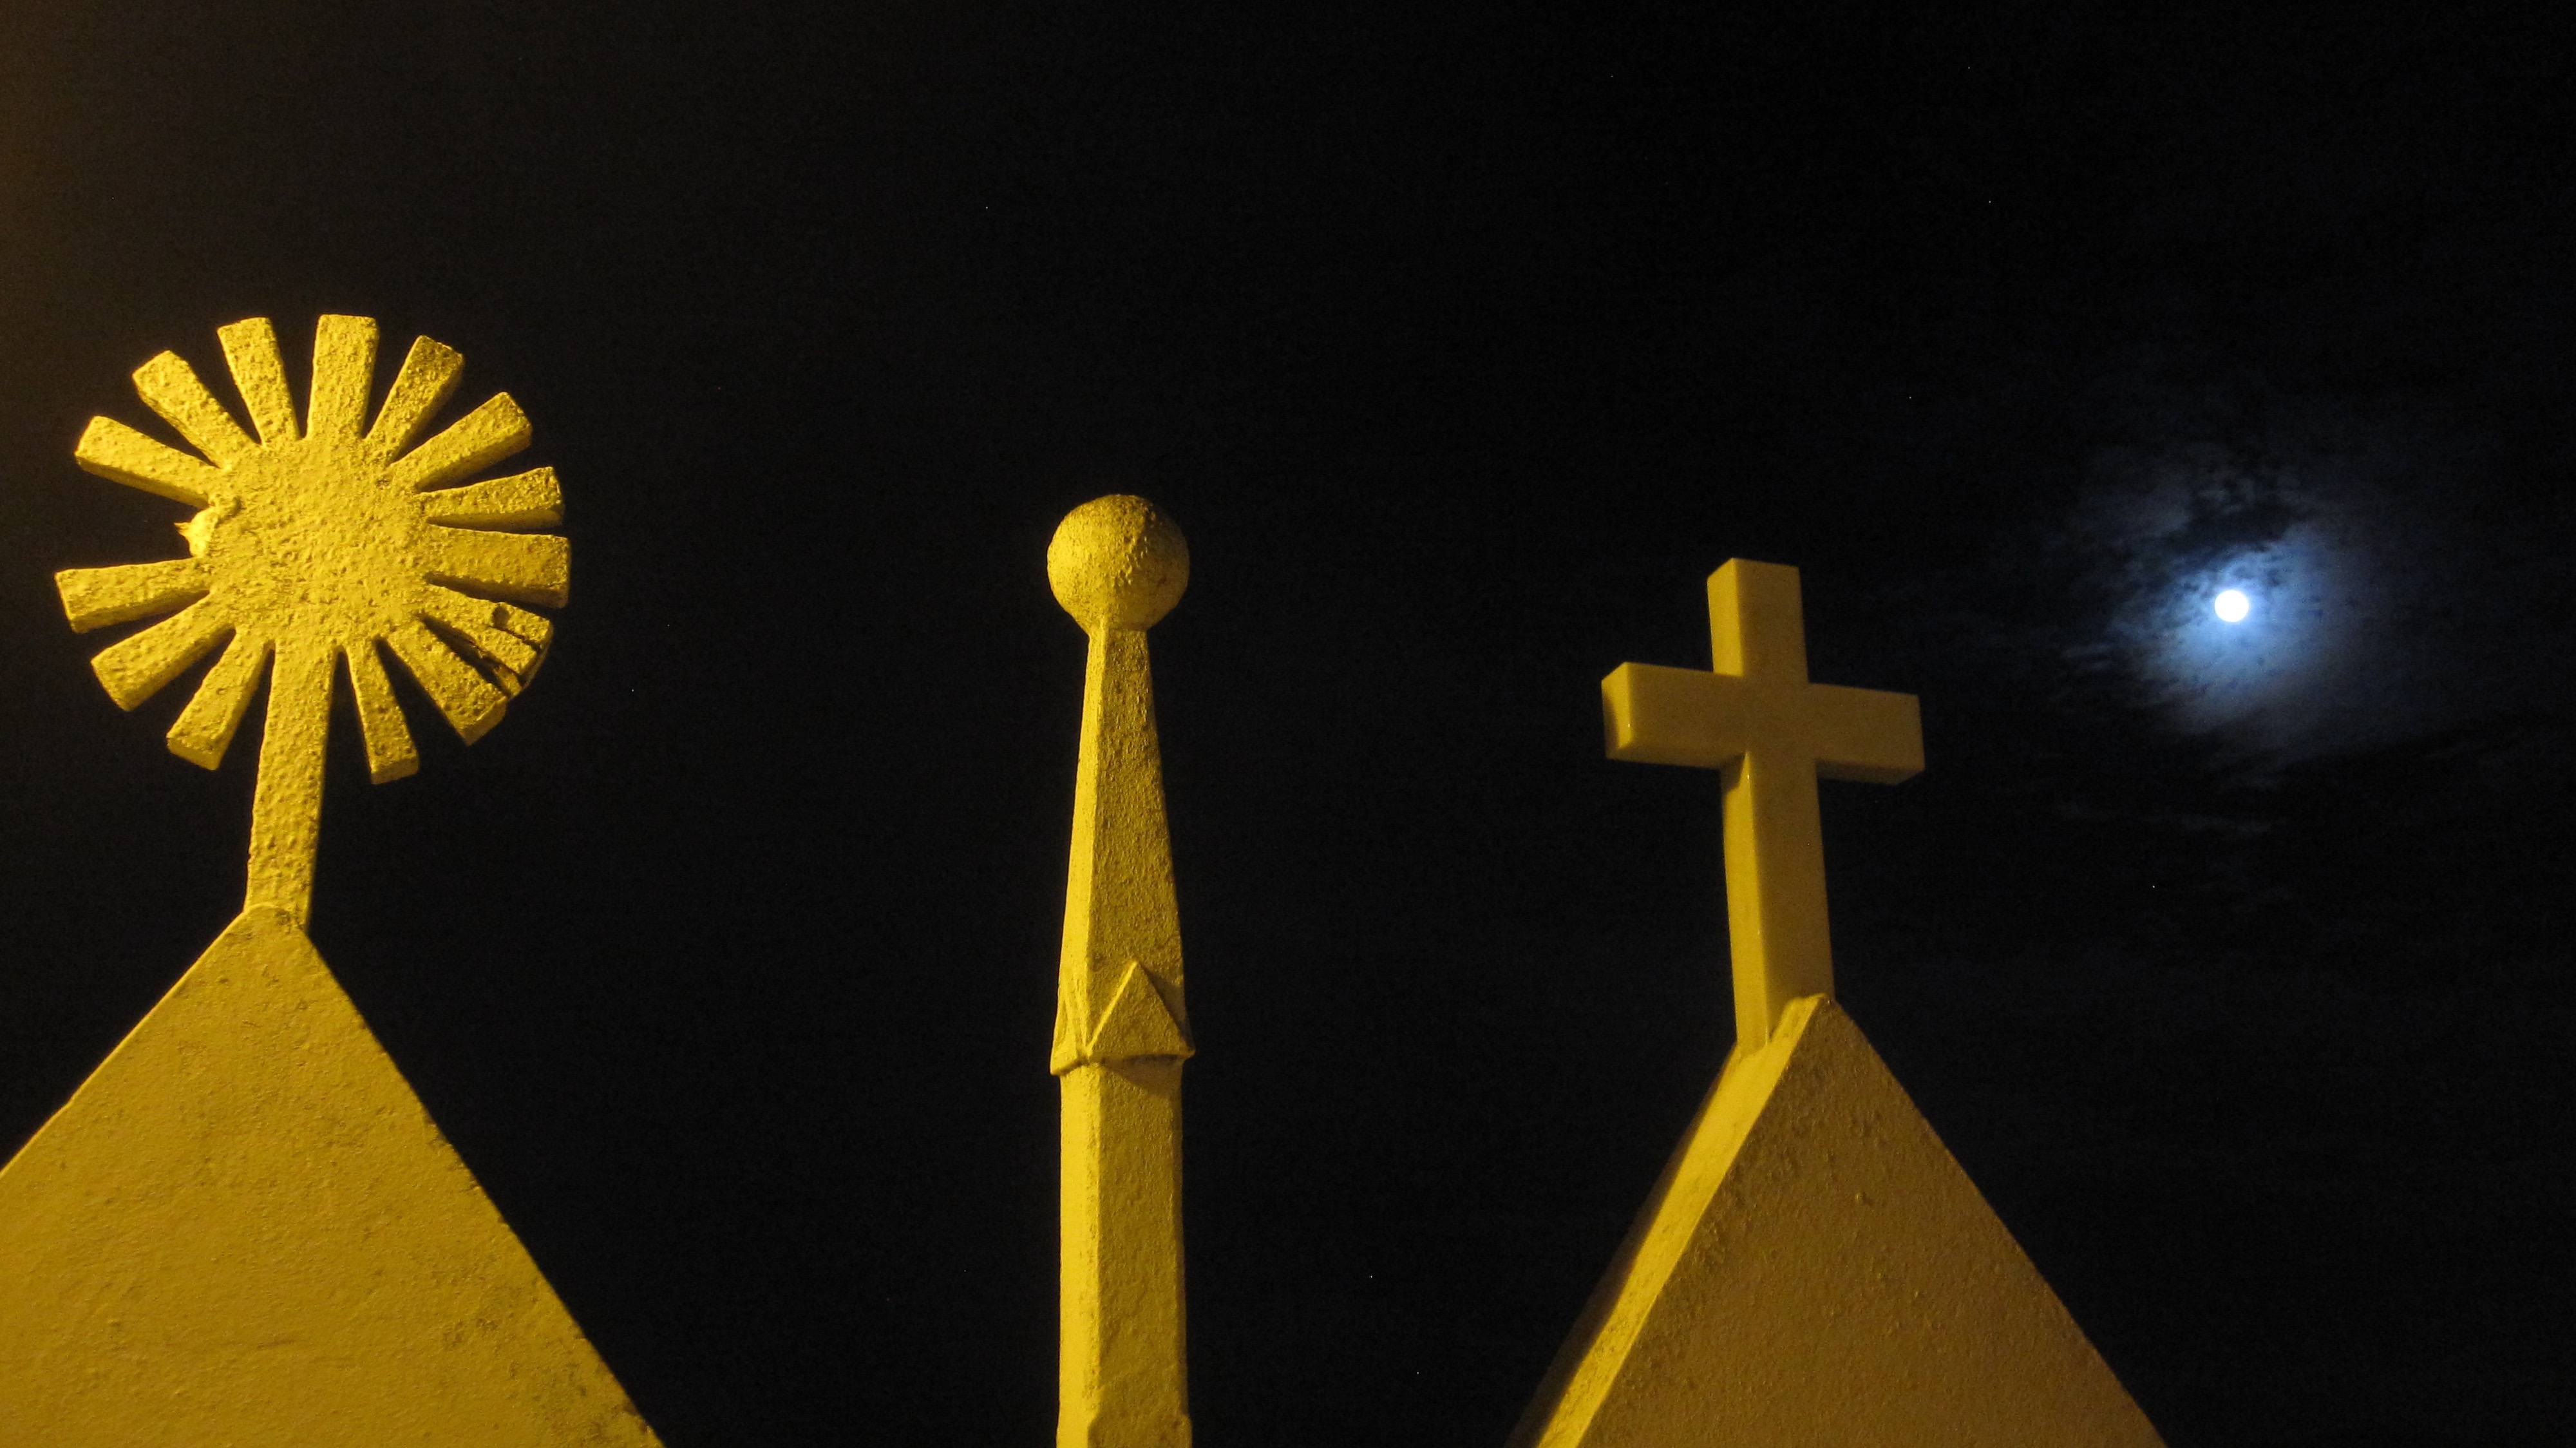 Symbols of the cemetery with full moon